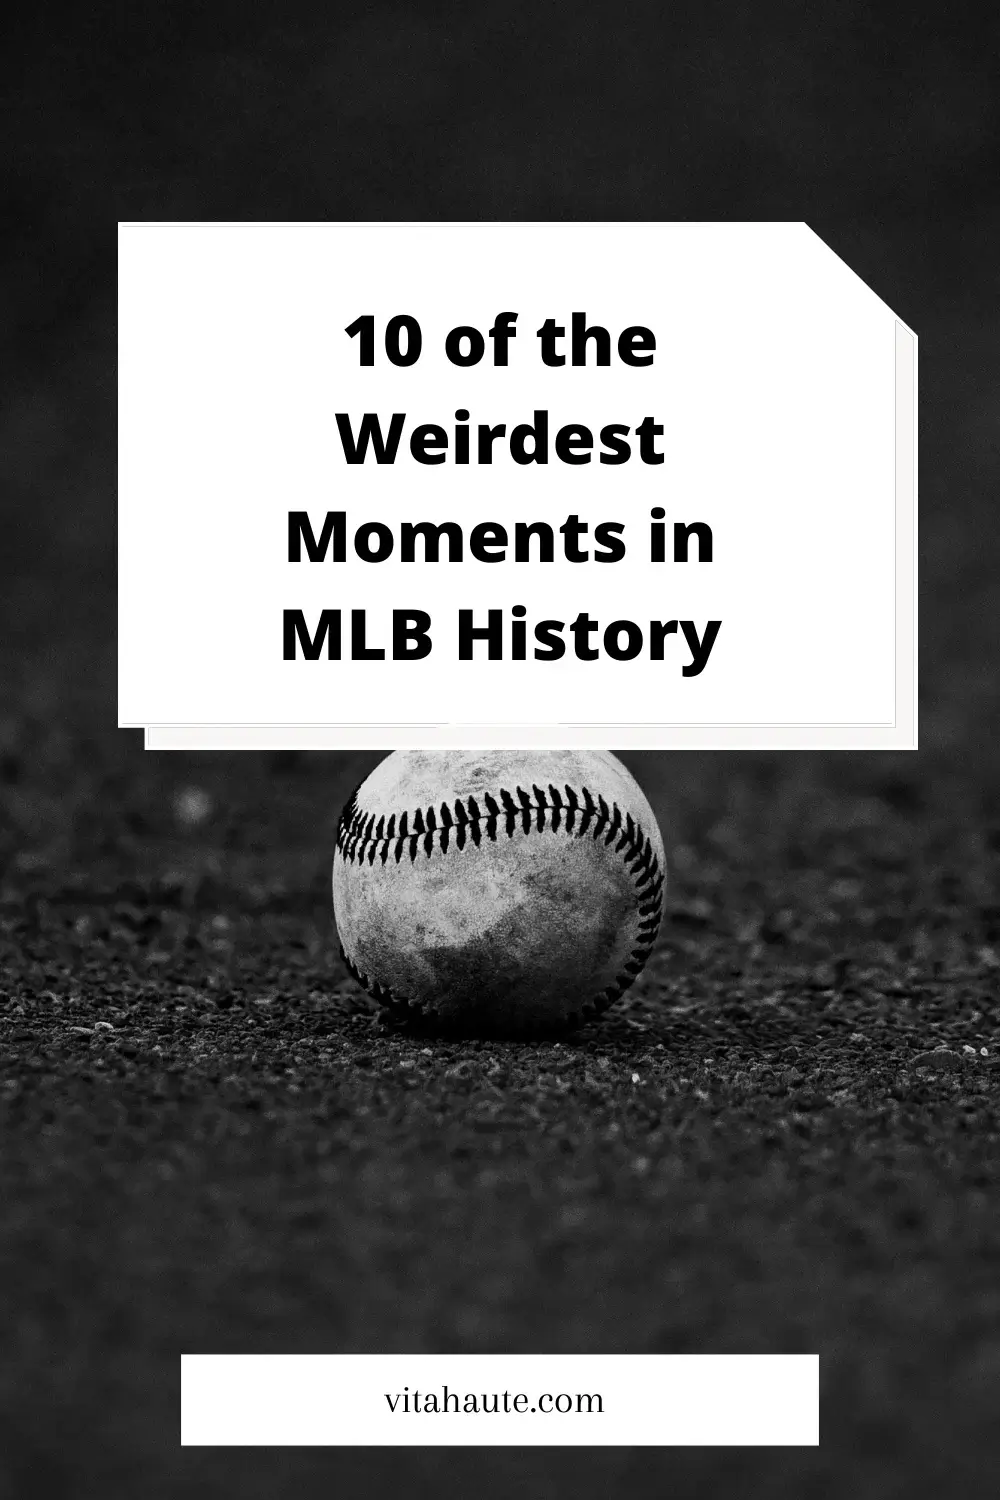 A collage of some of the weirdest moments in Major League Baseball history